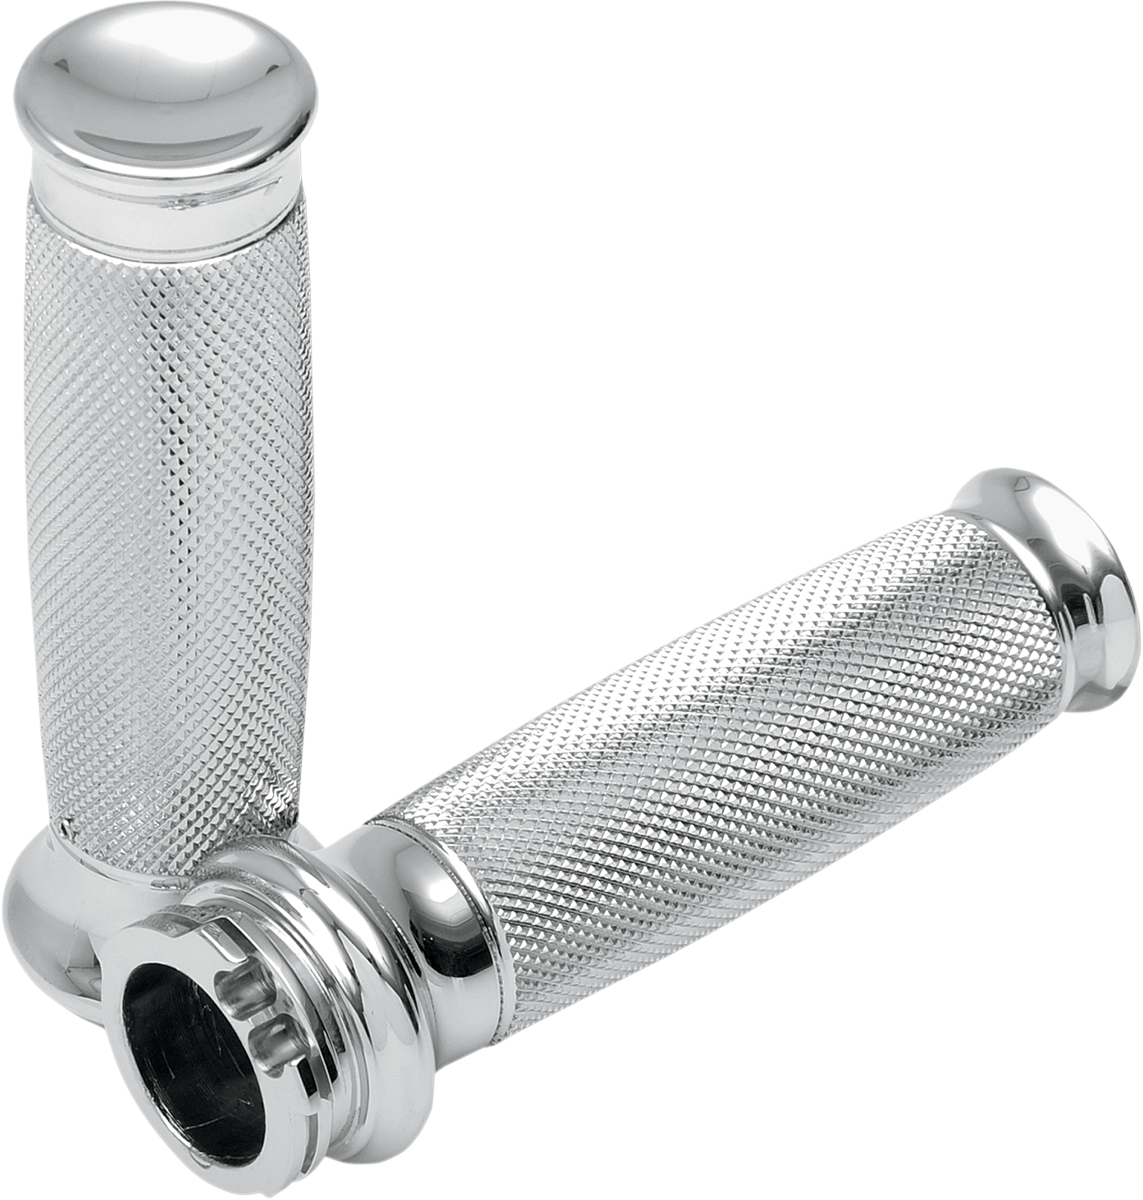 Todds Cycle Vice Chrome 1" Handlebar Hand Grips 1980-2020 Harley Softail Touring